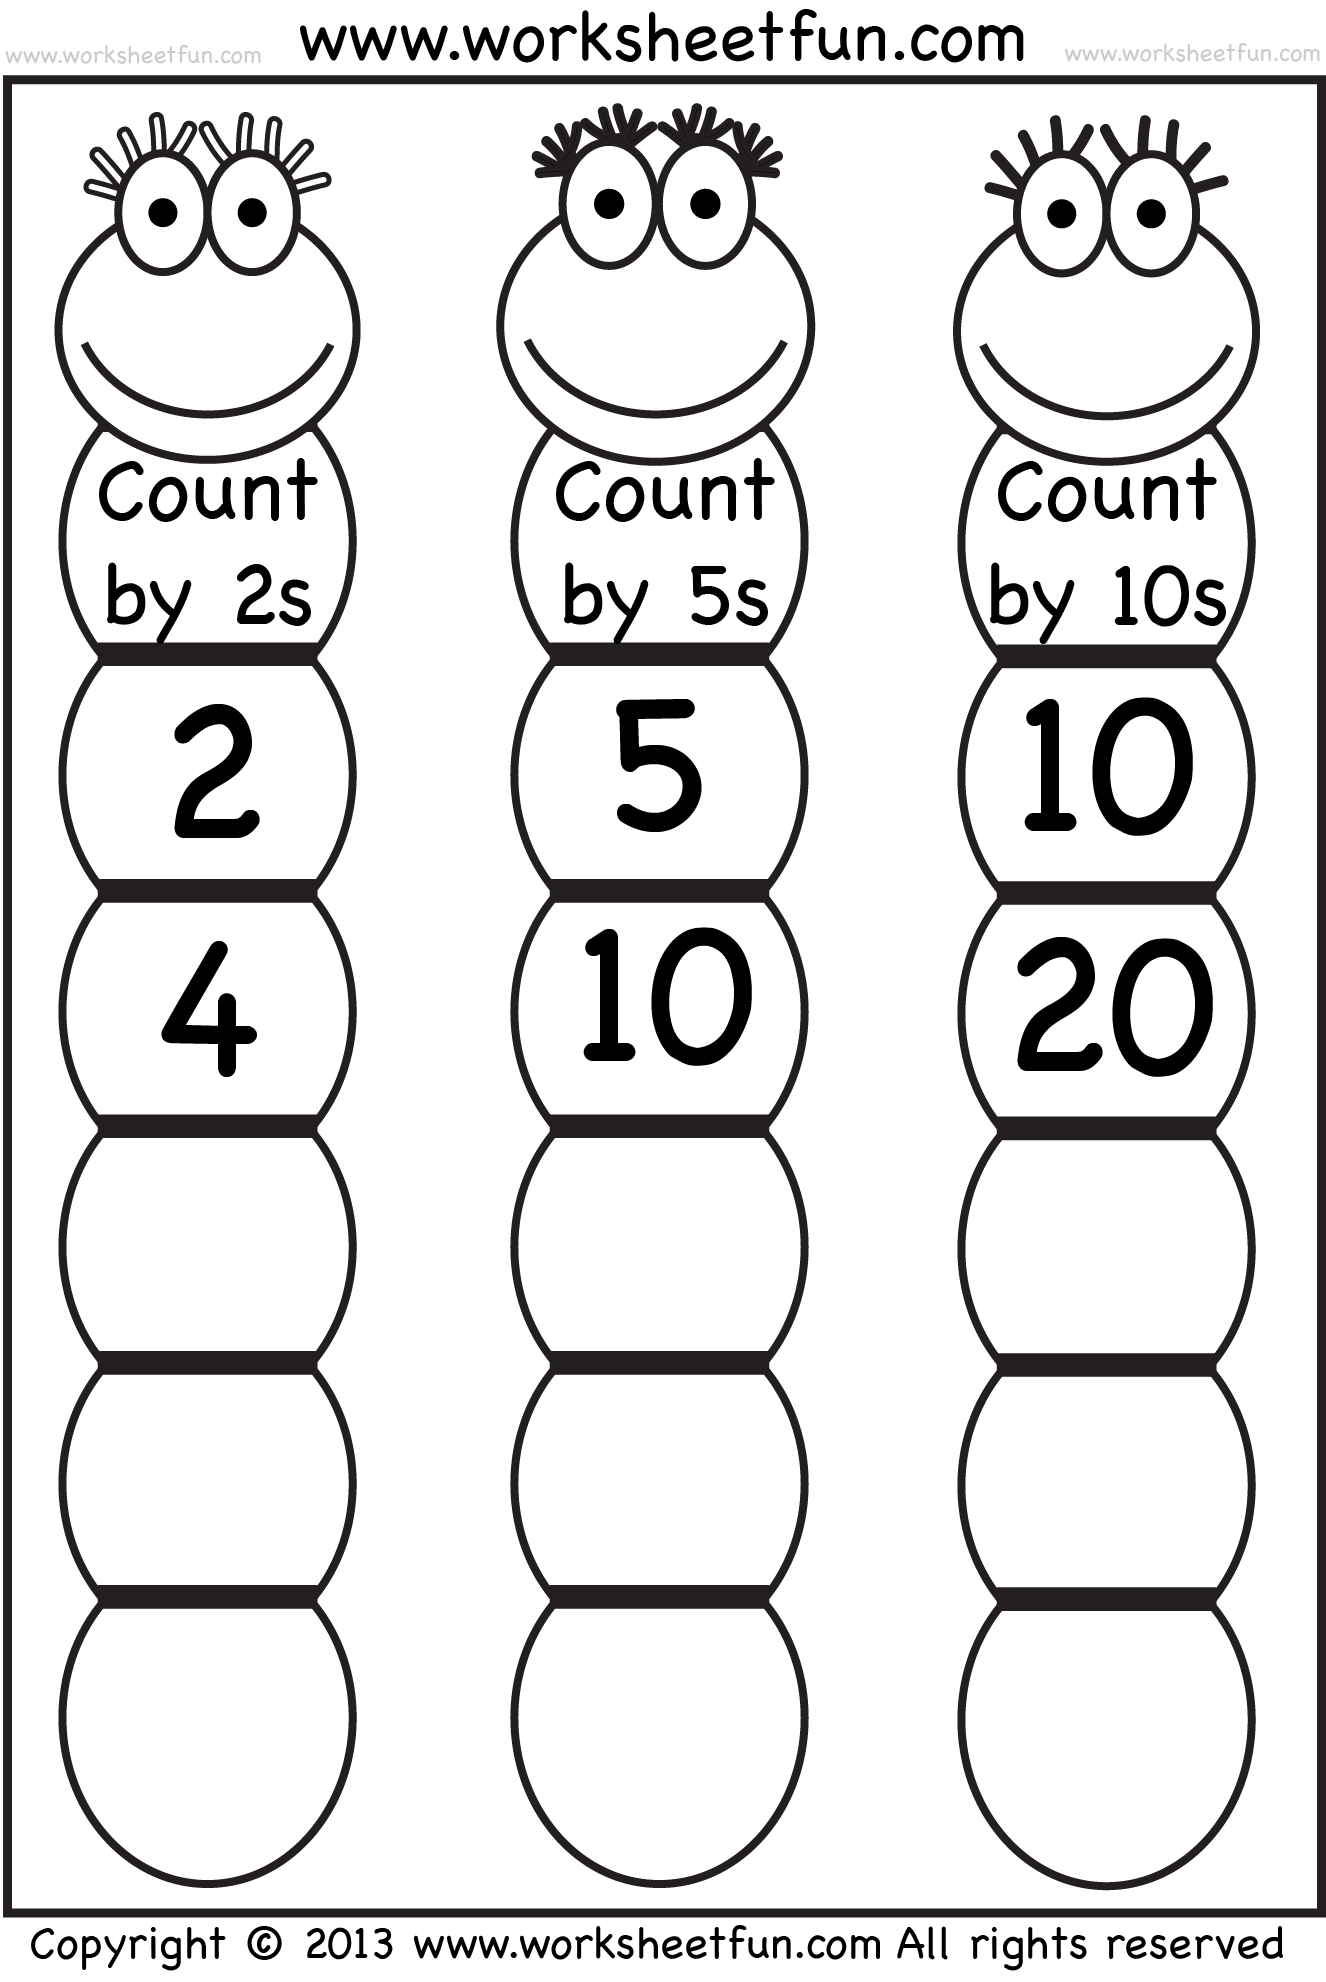 Printable Skip Count By 10 Worksheets 101 Activity Counting In 10s 